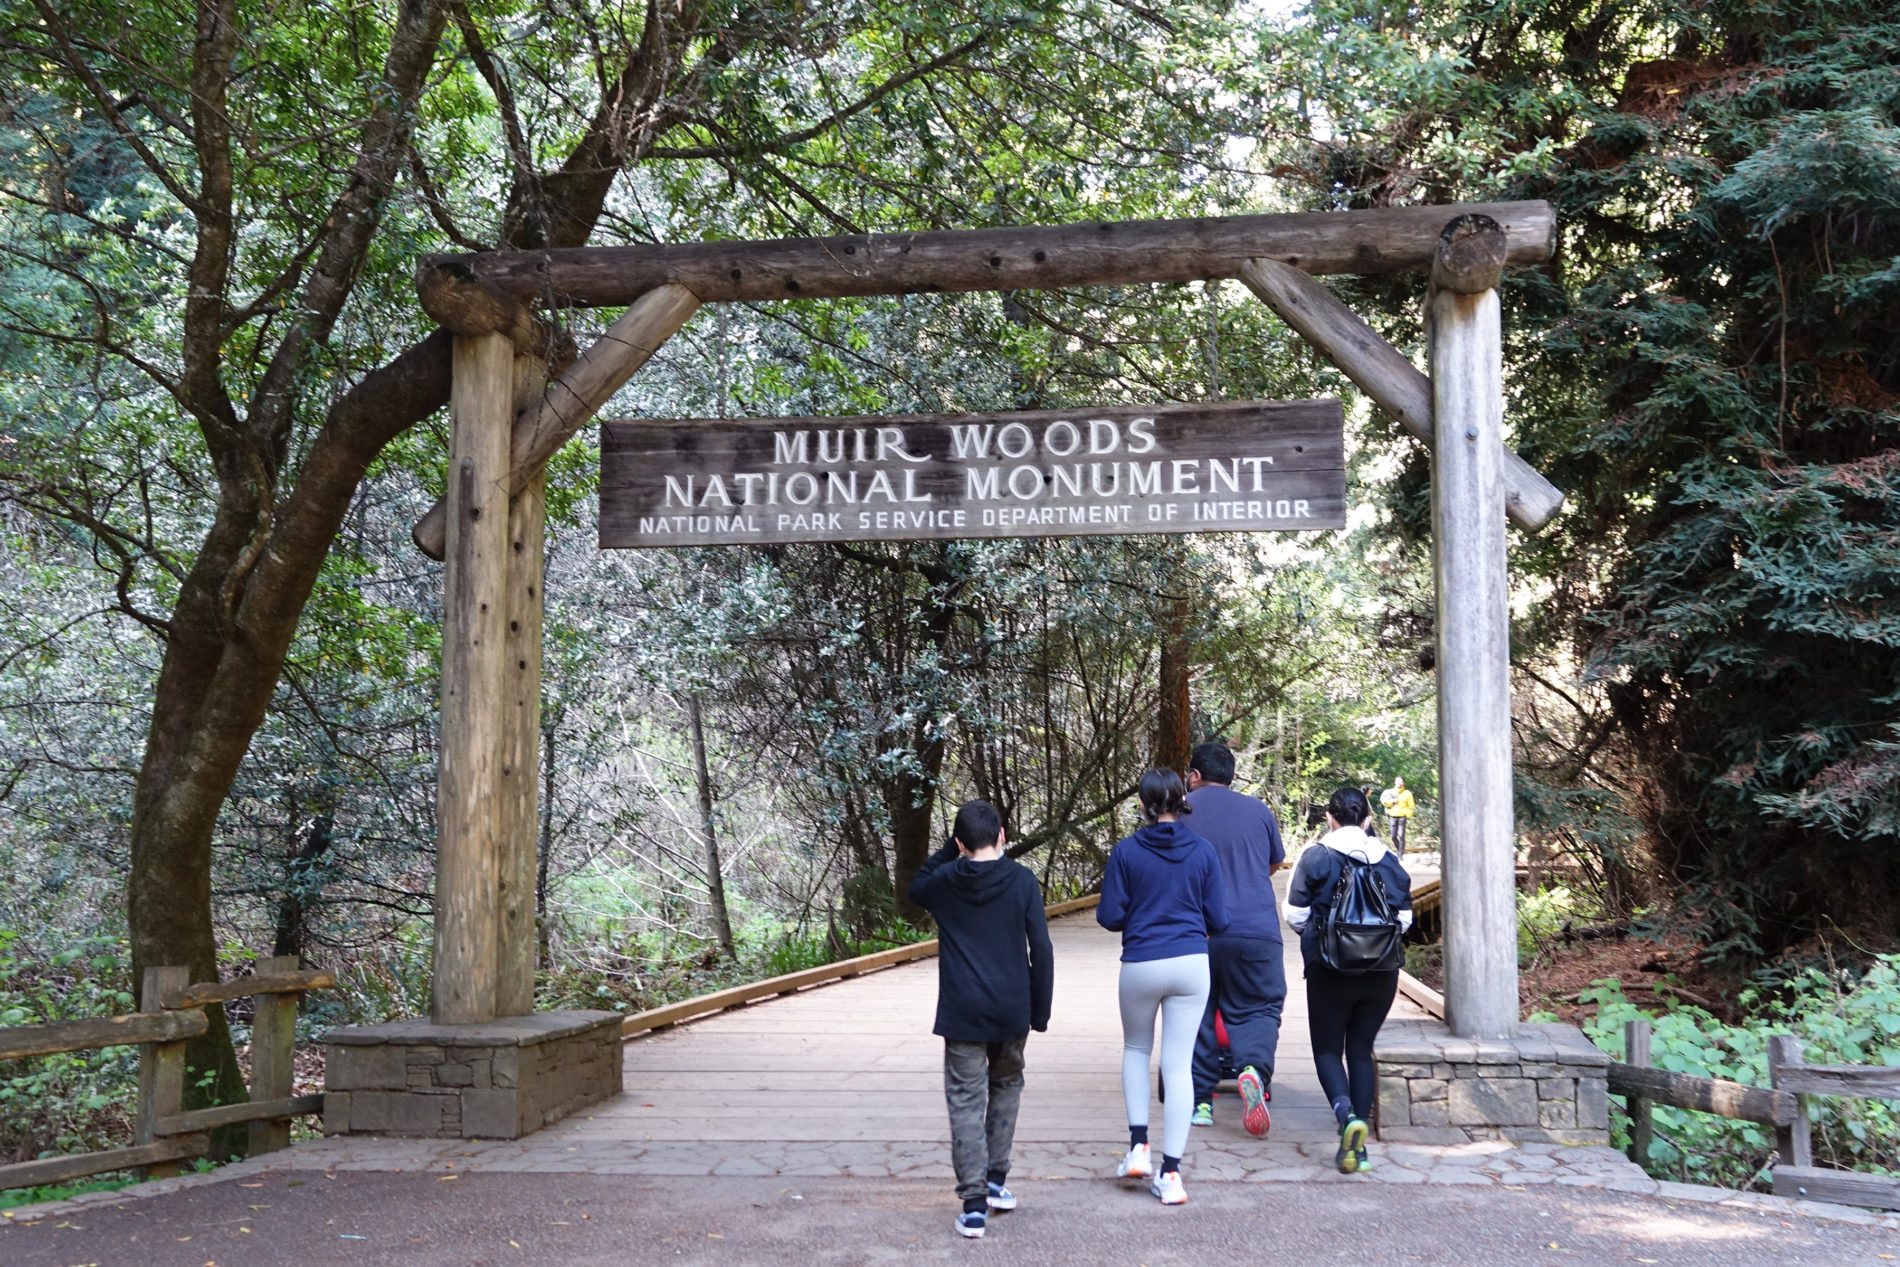 Family walking through the entrance to Muir Woods National Monument.